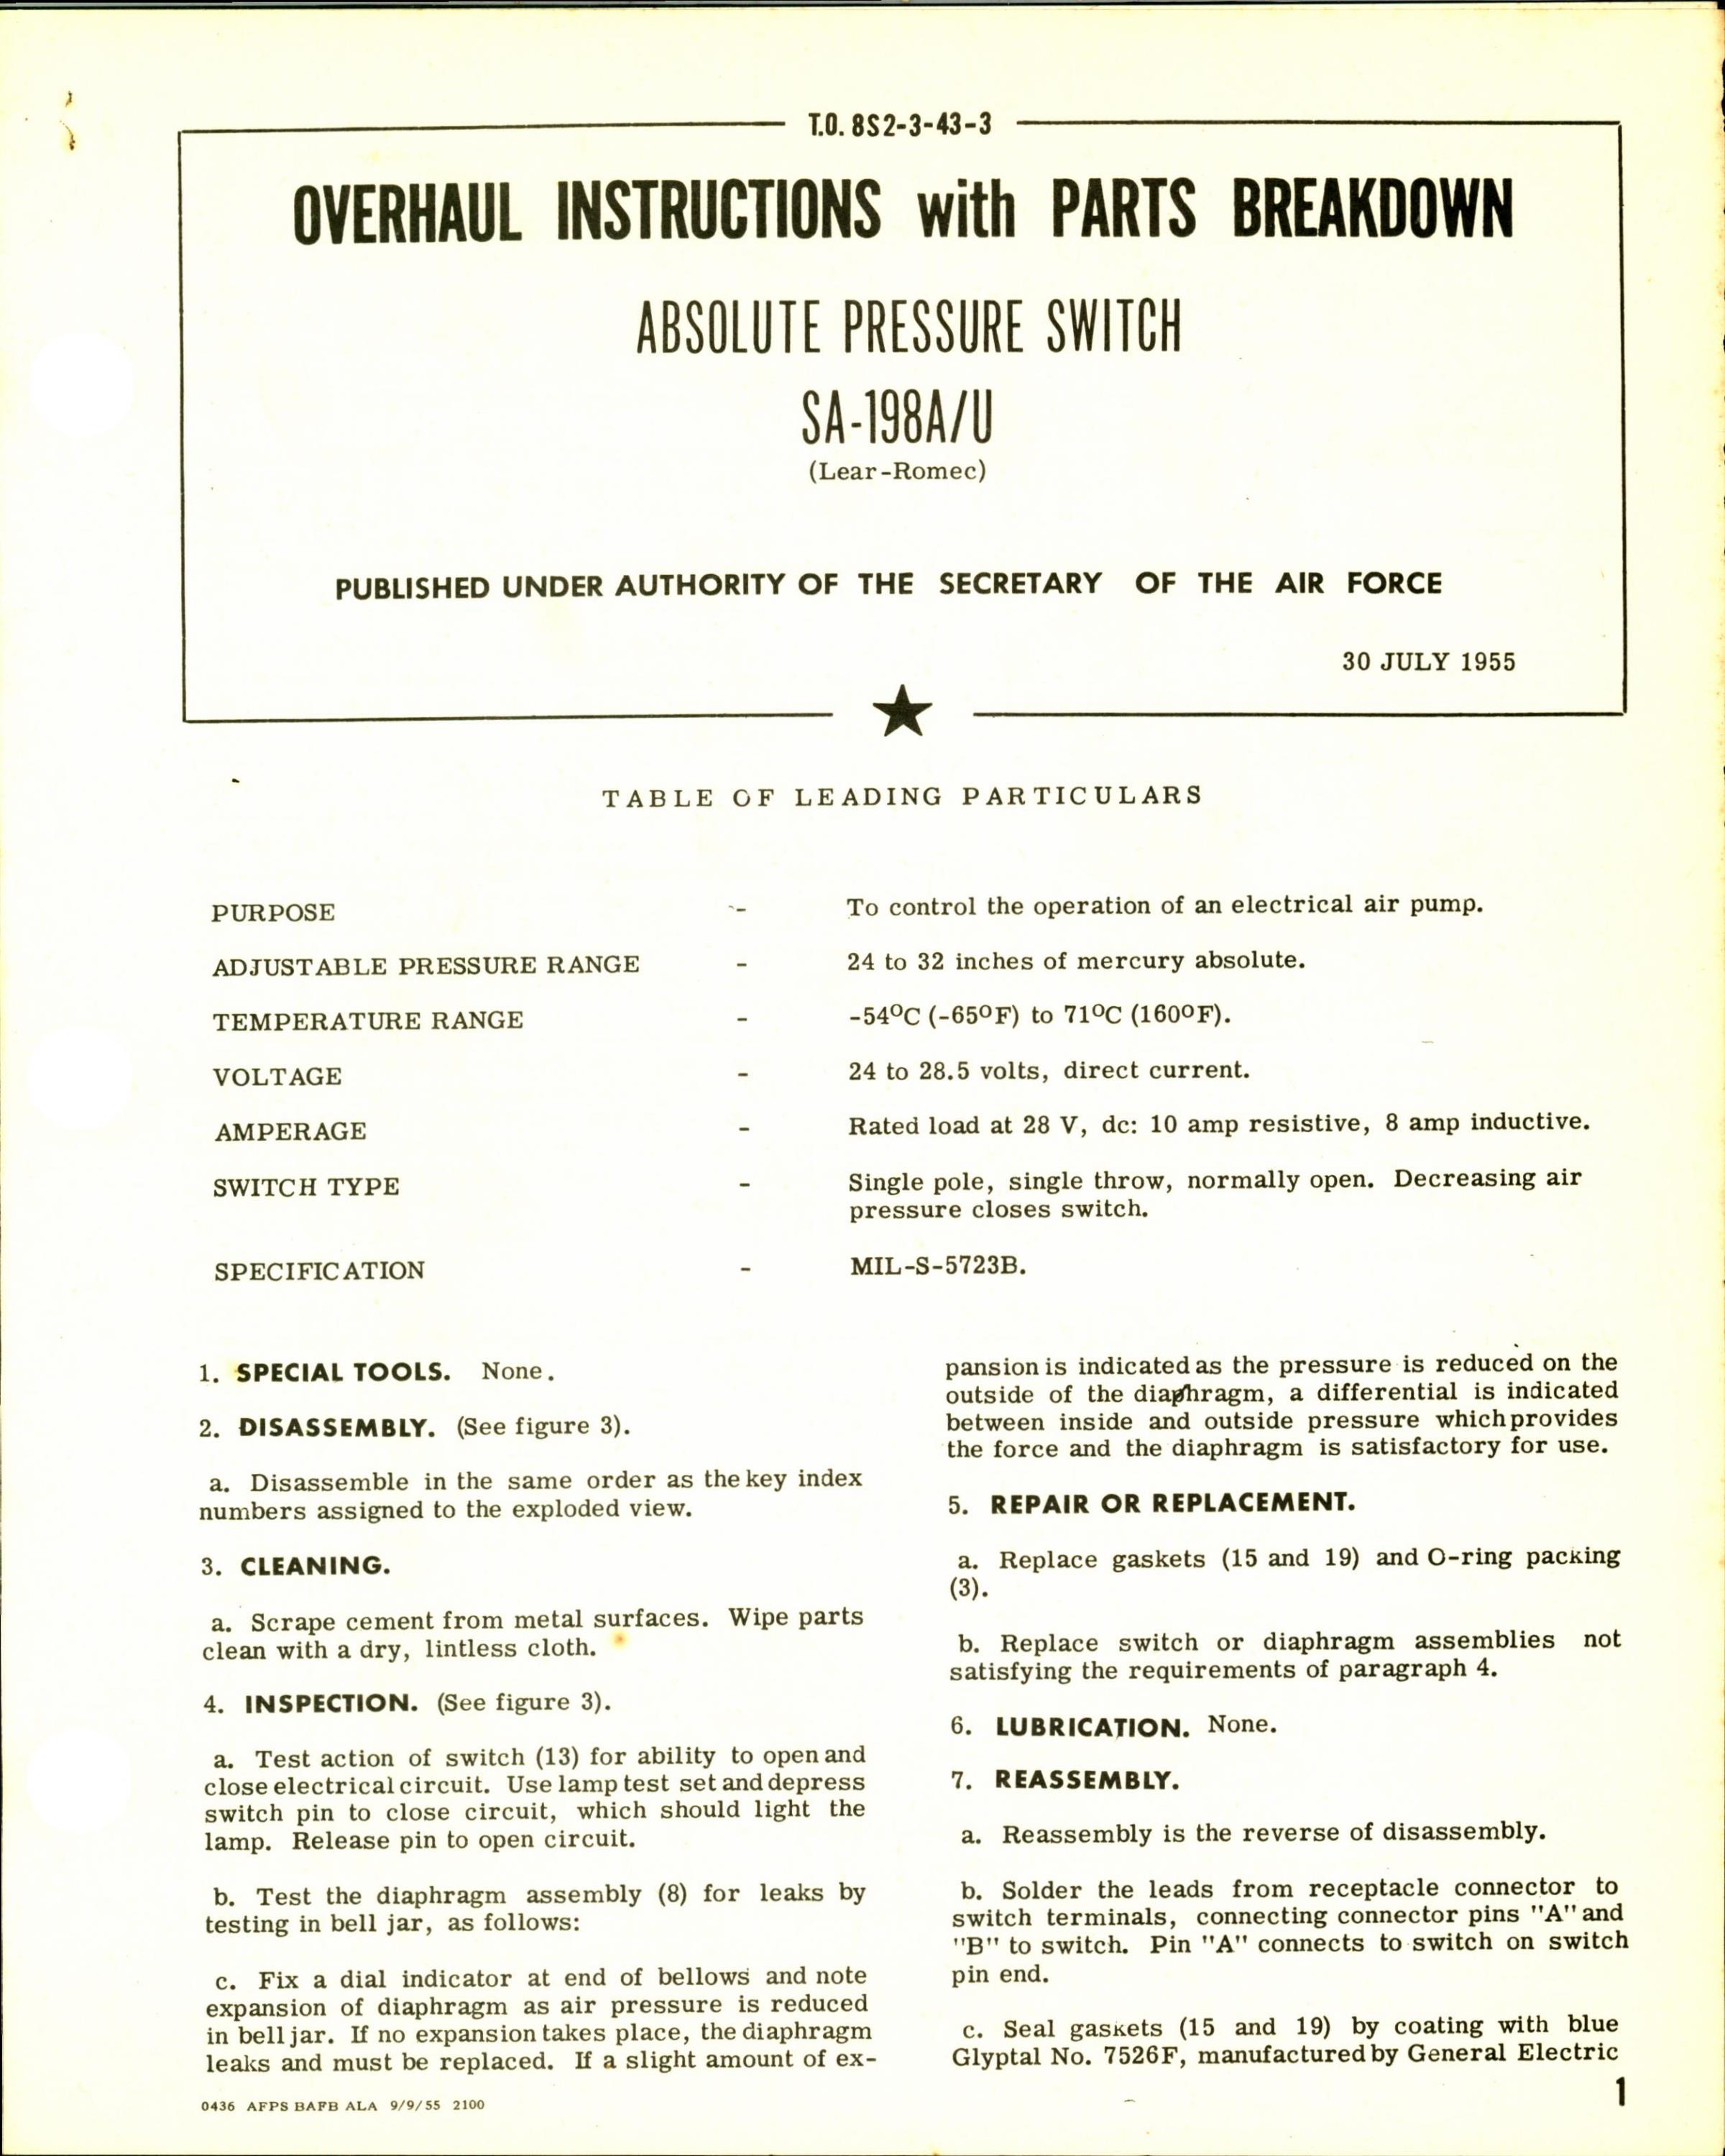 Sample page 1 from AirCorps Library document: Overhaul Instructions with Parts Breakdown for Absolute Pressure Switch SA-198A-U